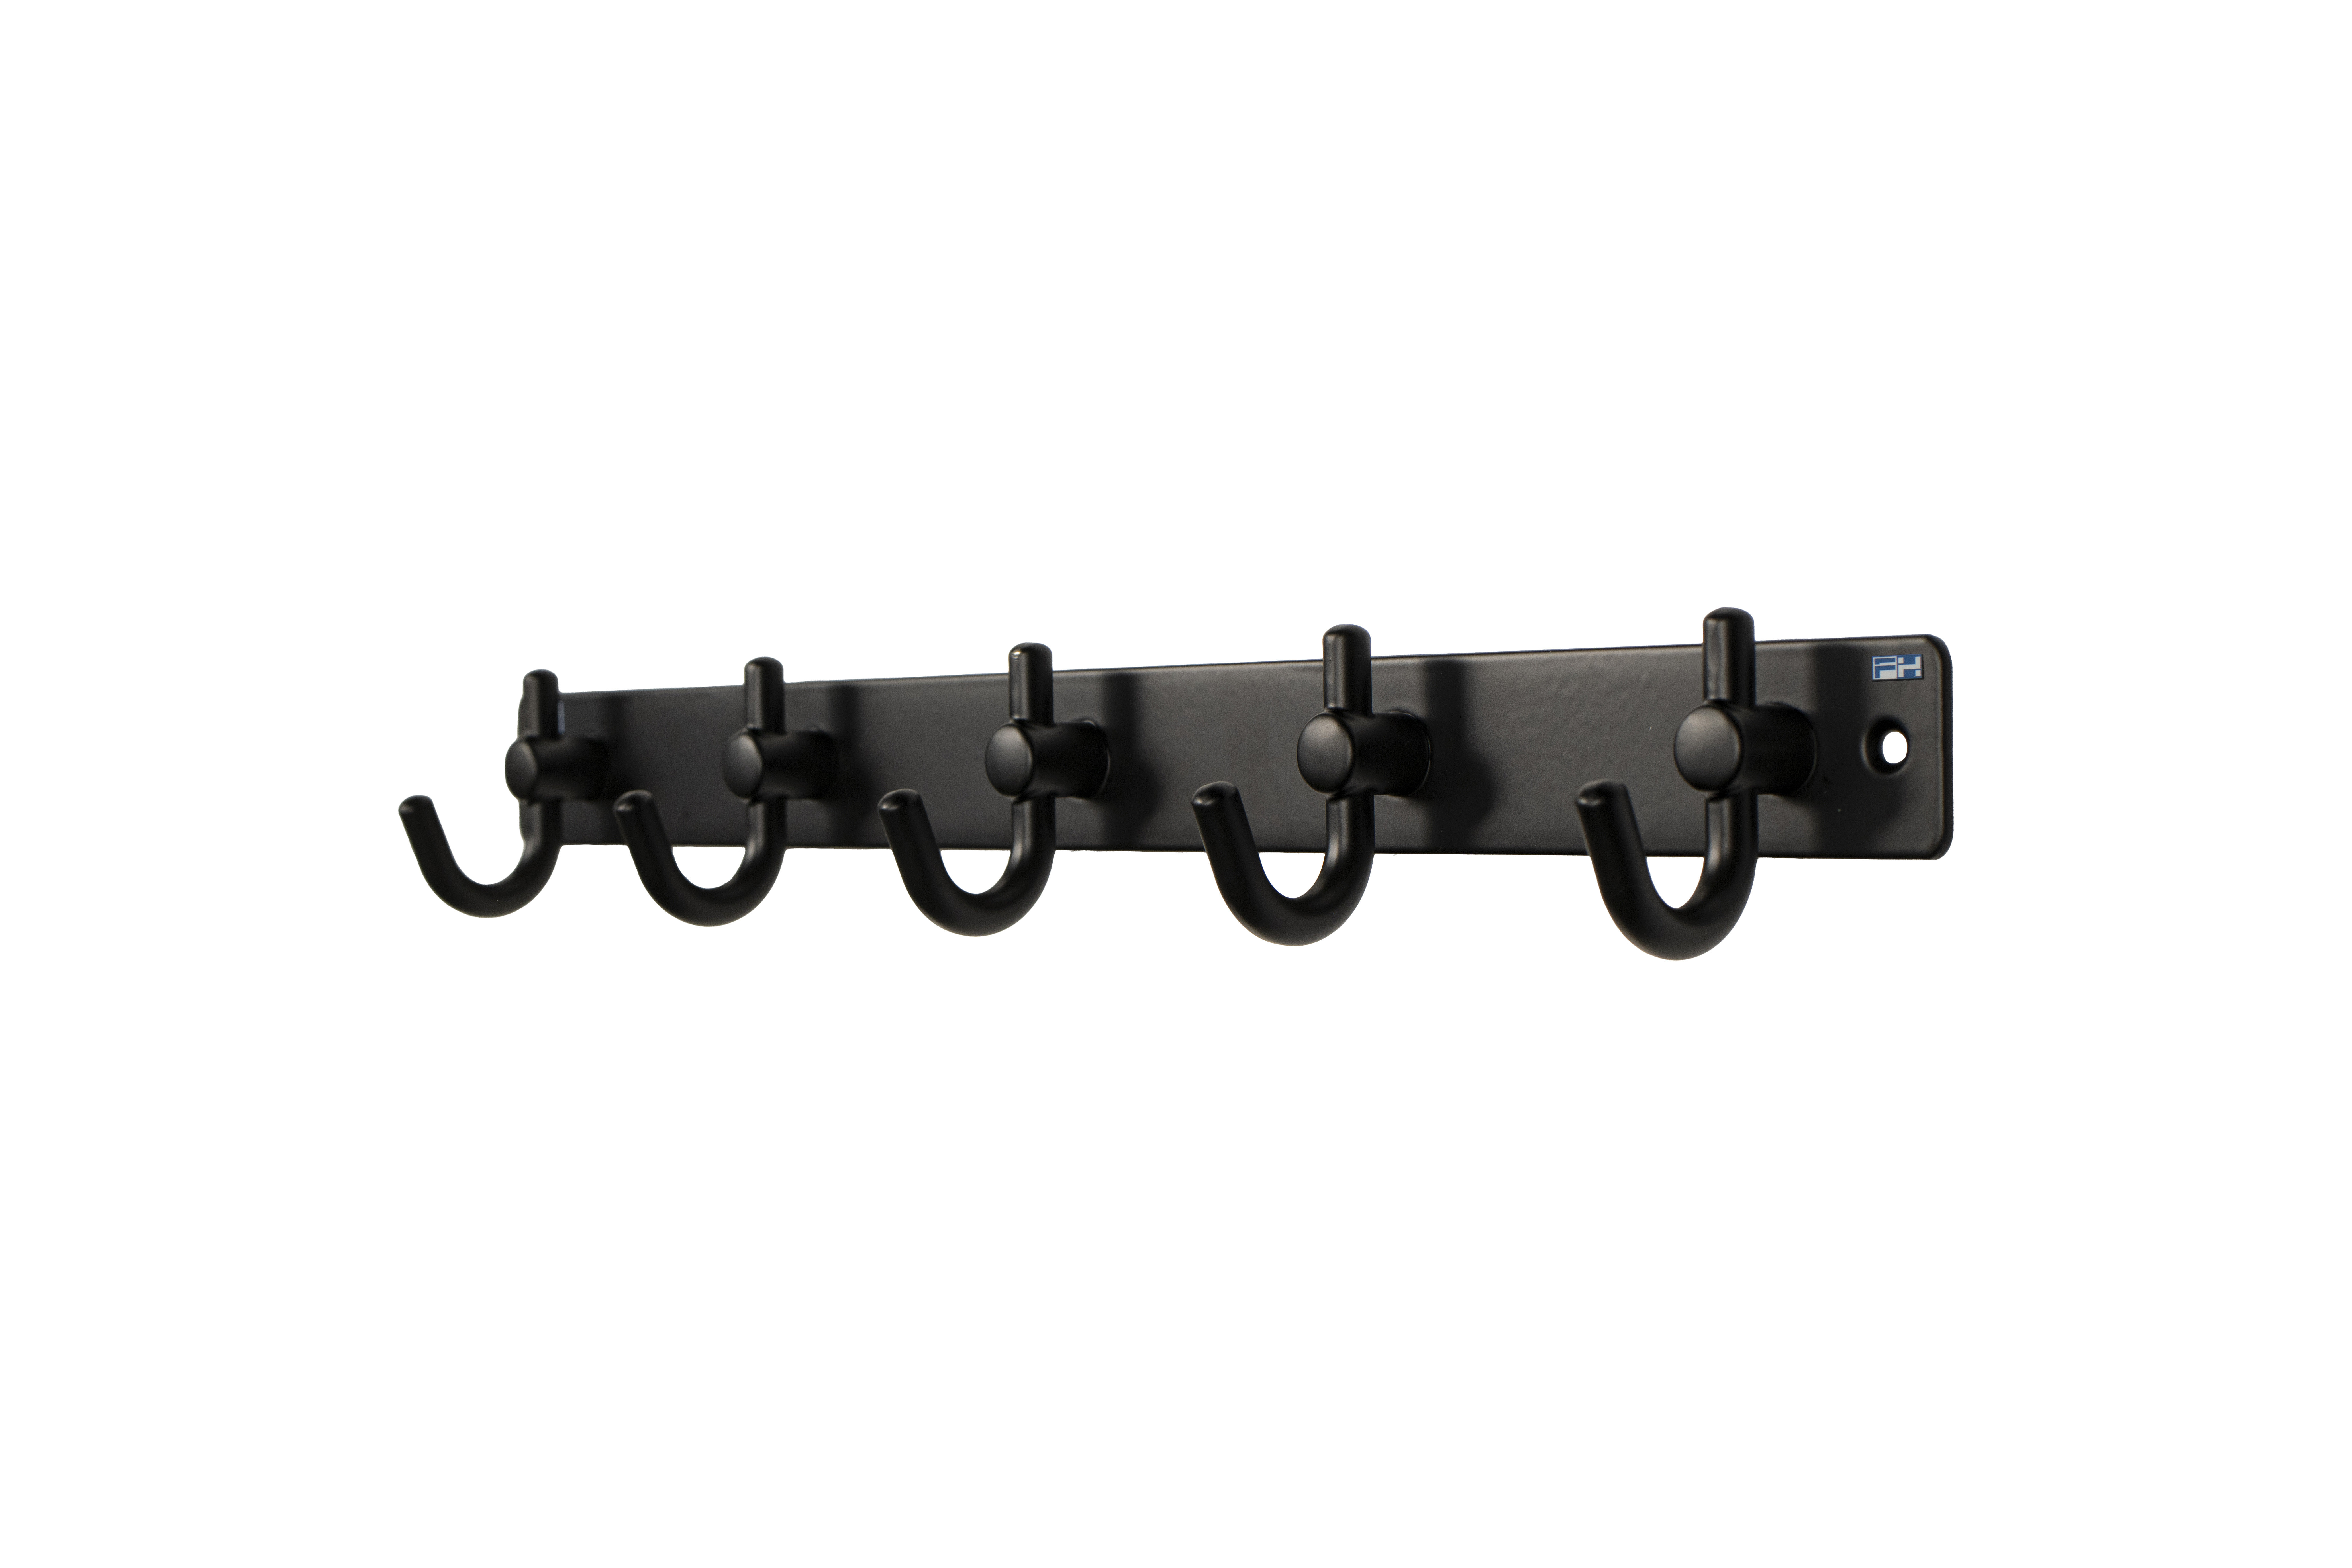 Black Stainless Steel Wall Mounted 5 Coat Hooks for Hanging Coats